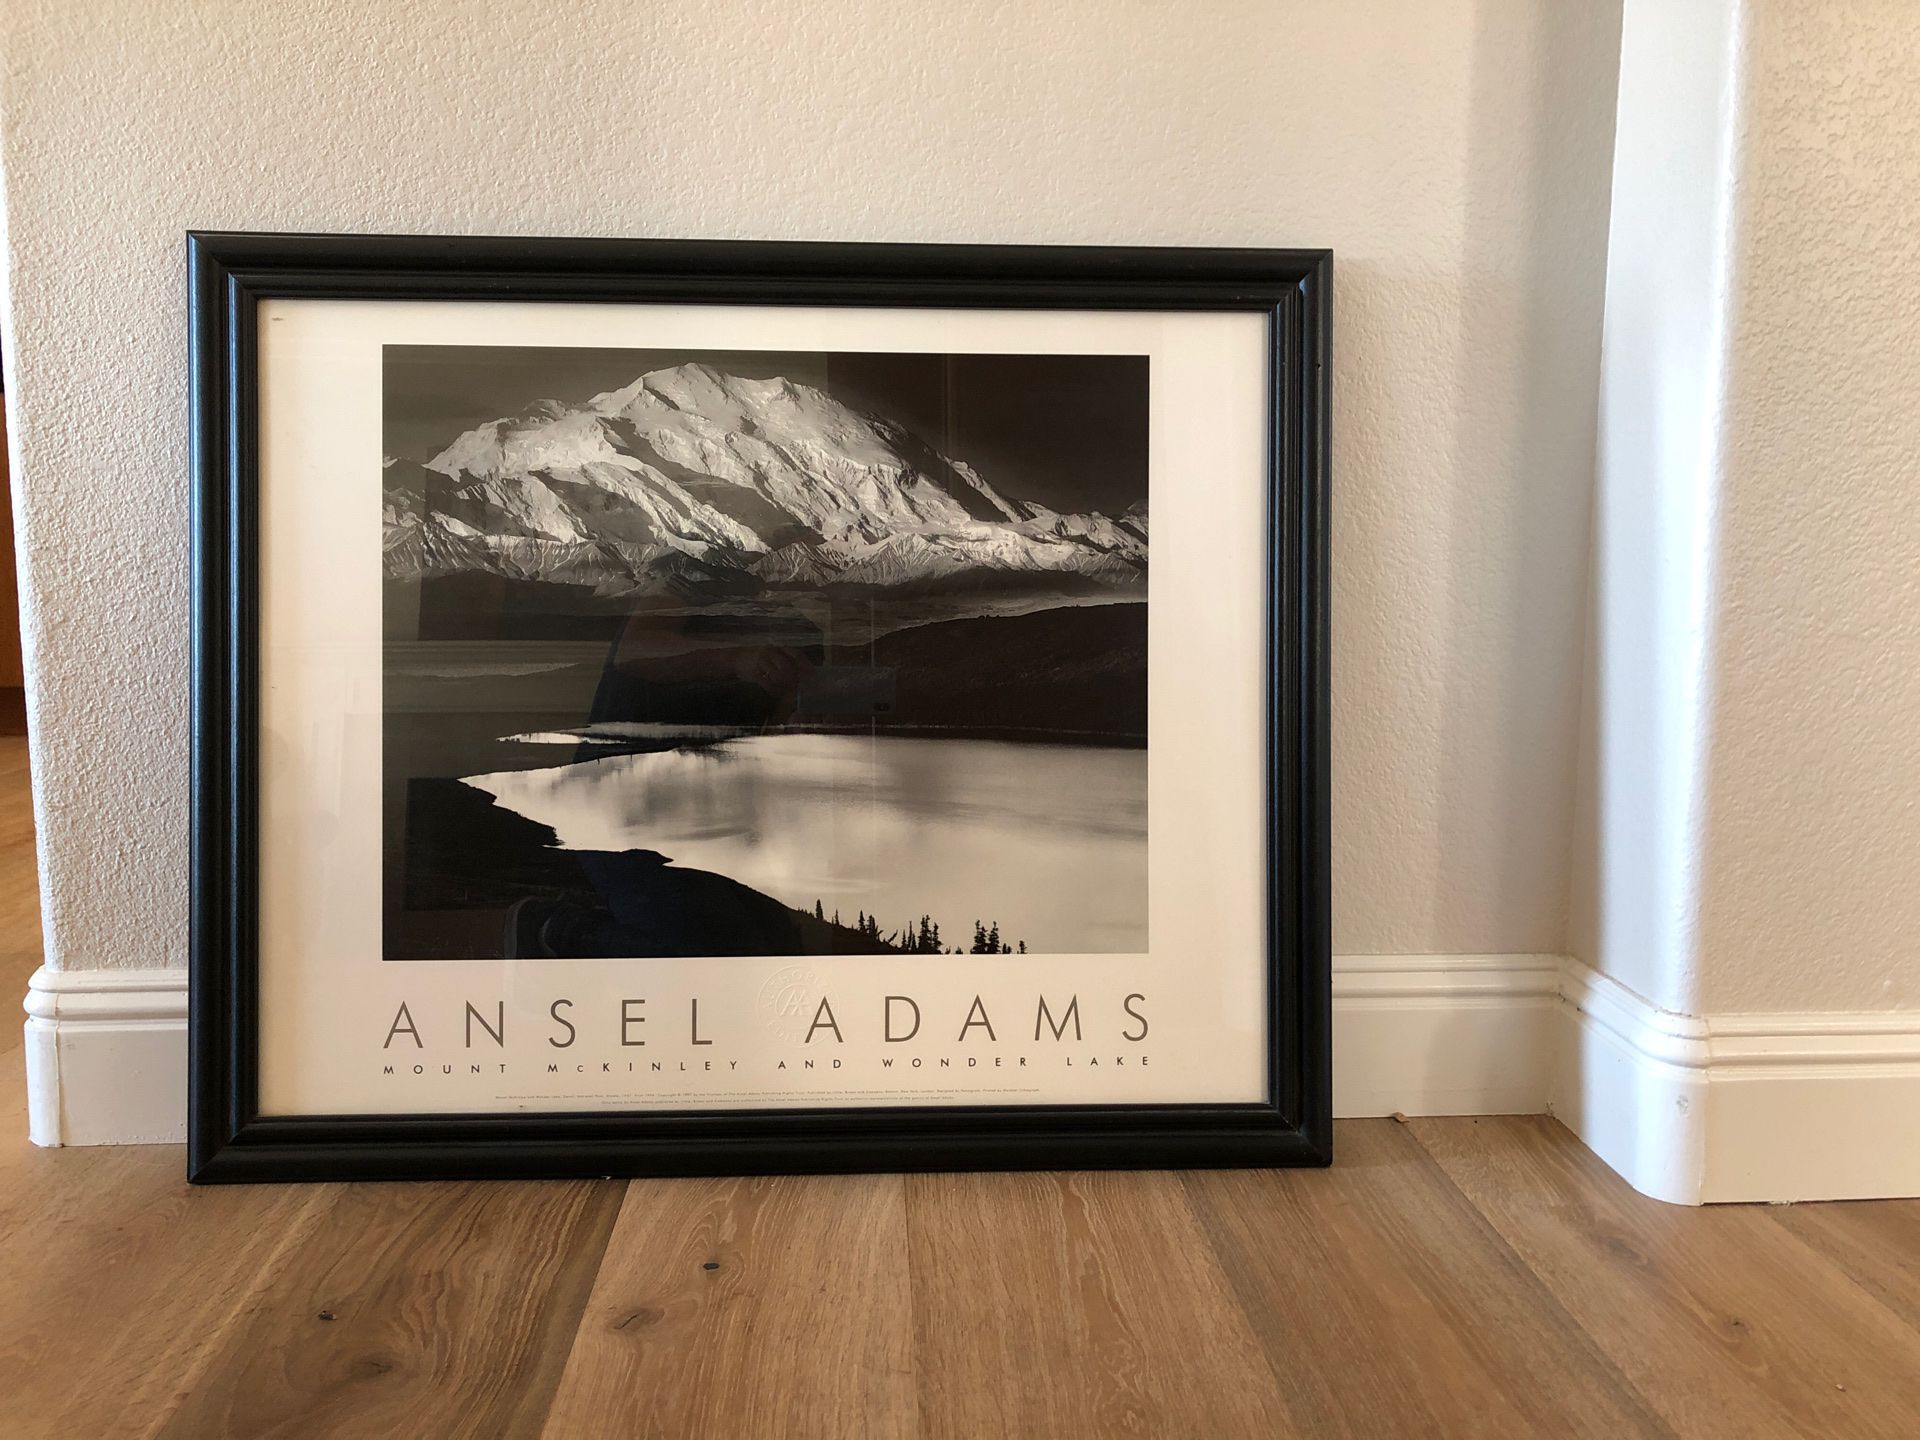 Ansel Adams Mount McKinley and Wonder Lake authorized edition